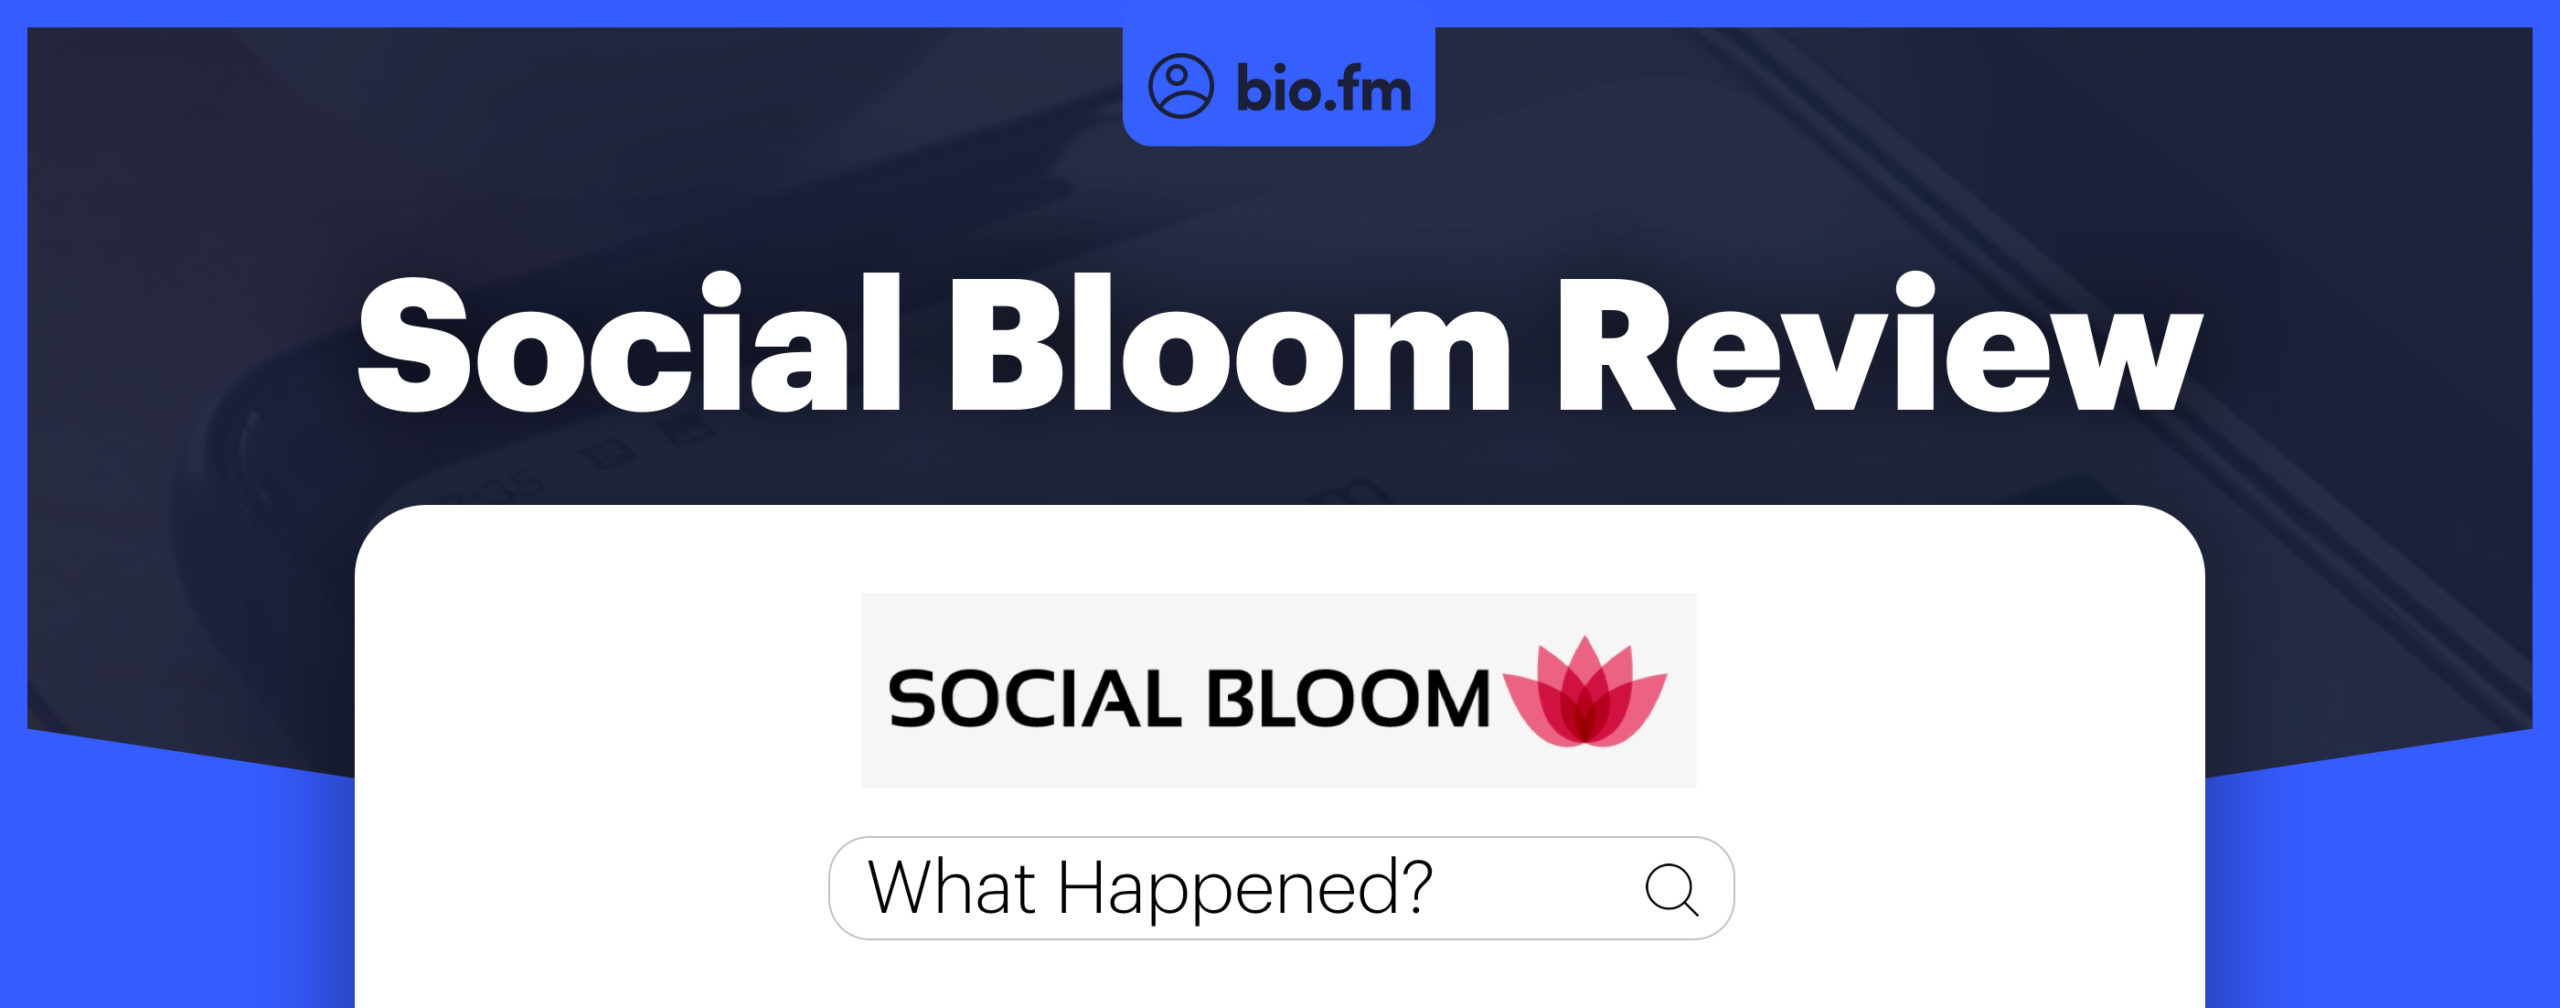 socialbloom review featured image